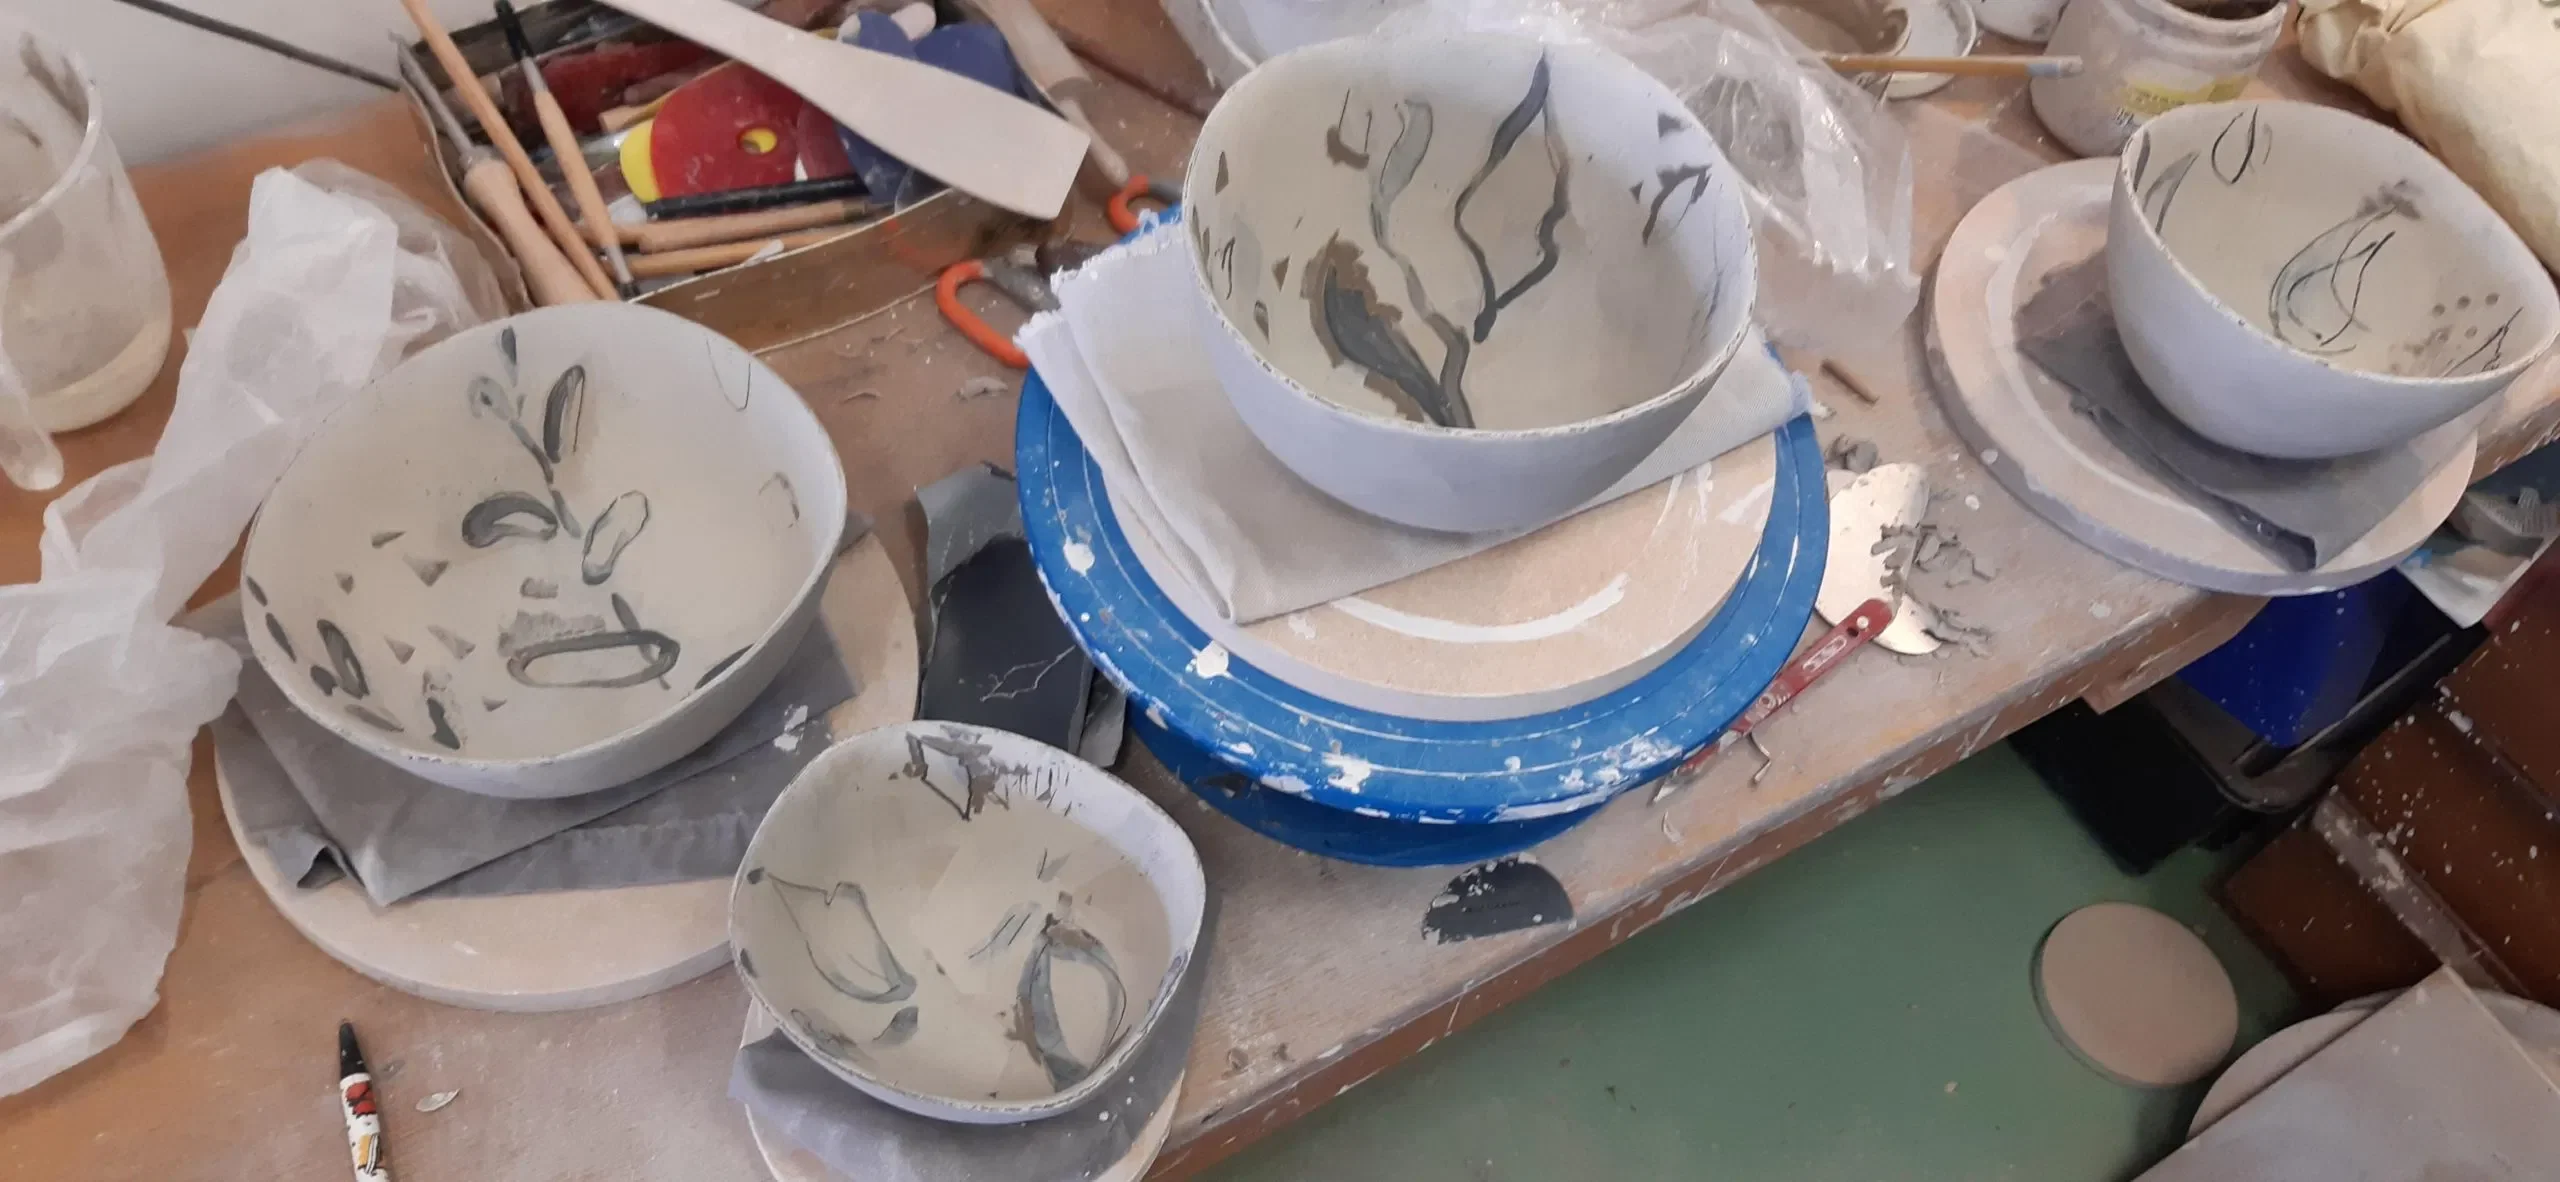 Ceramics - Project Based Evening Course